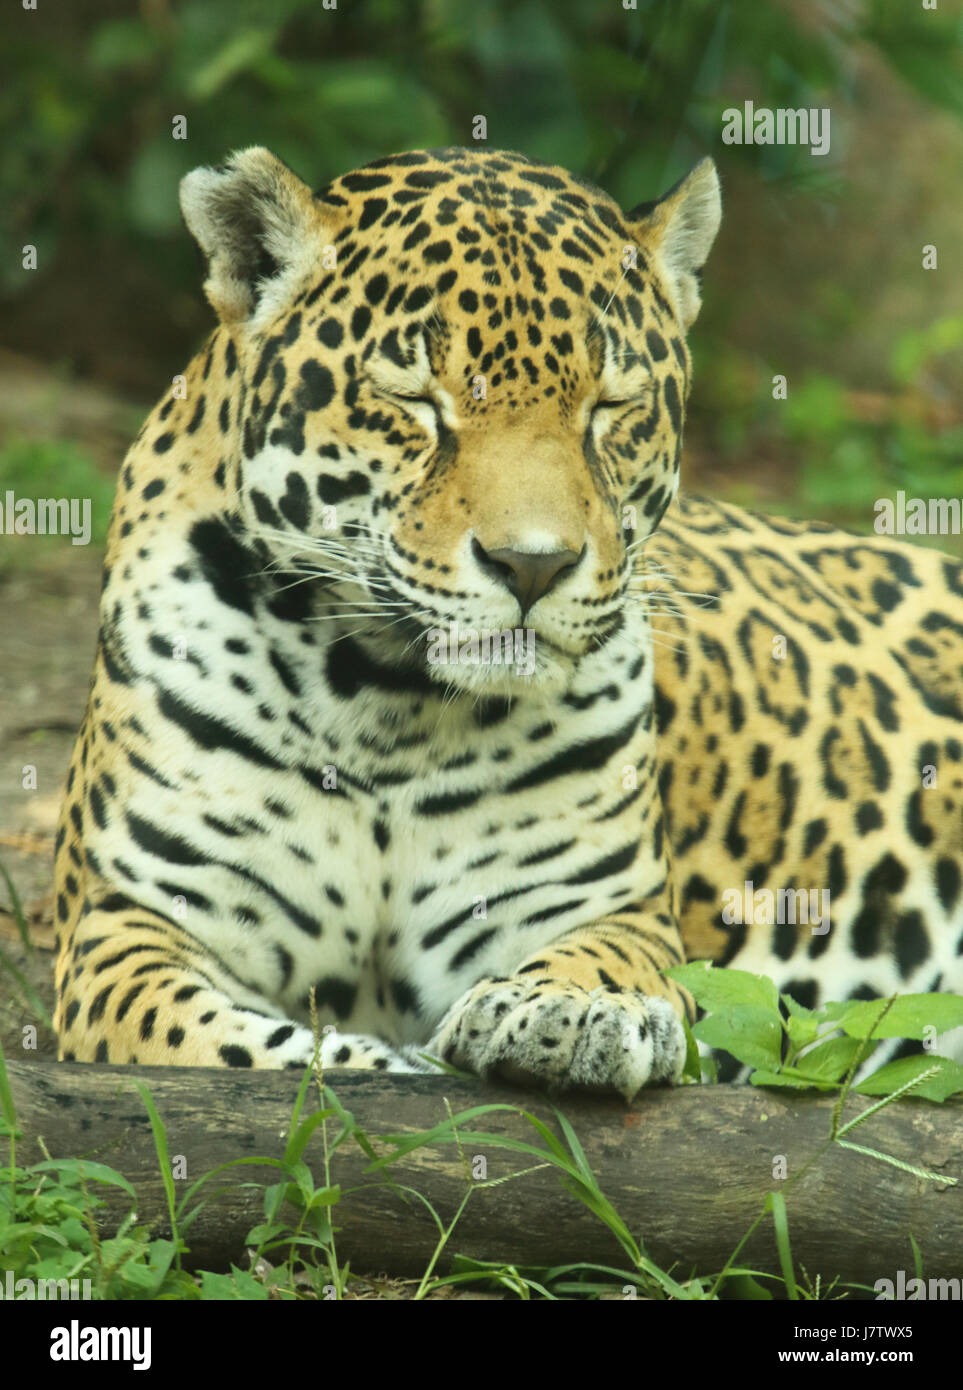 A jaguar napping on a warm summer day. Stock Photo